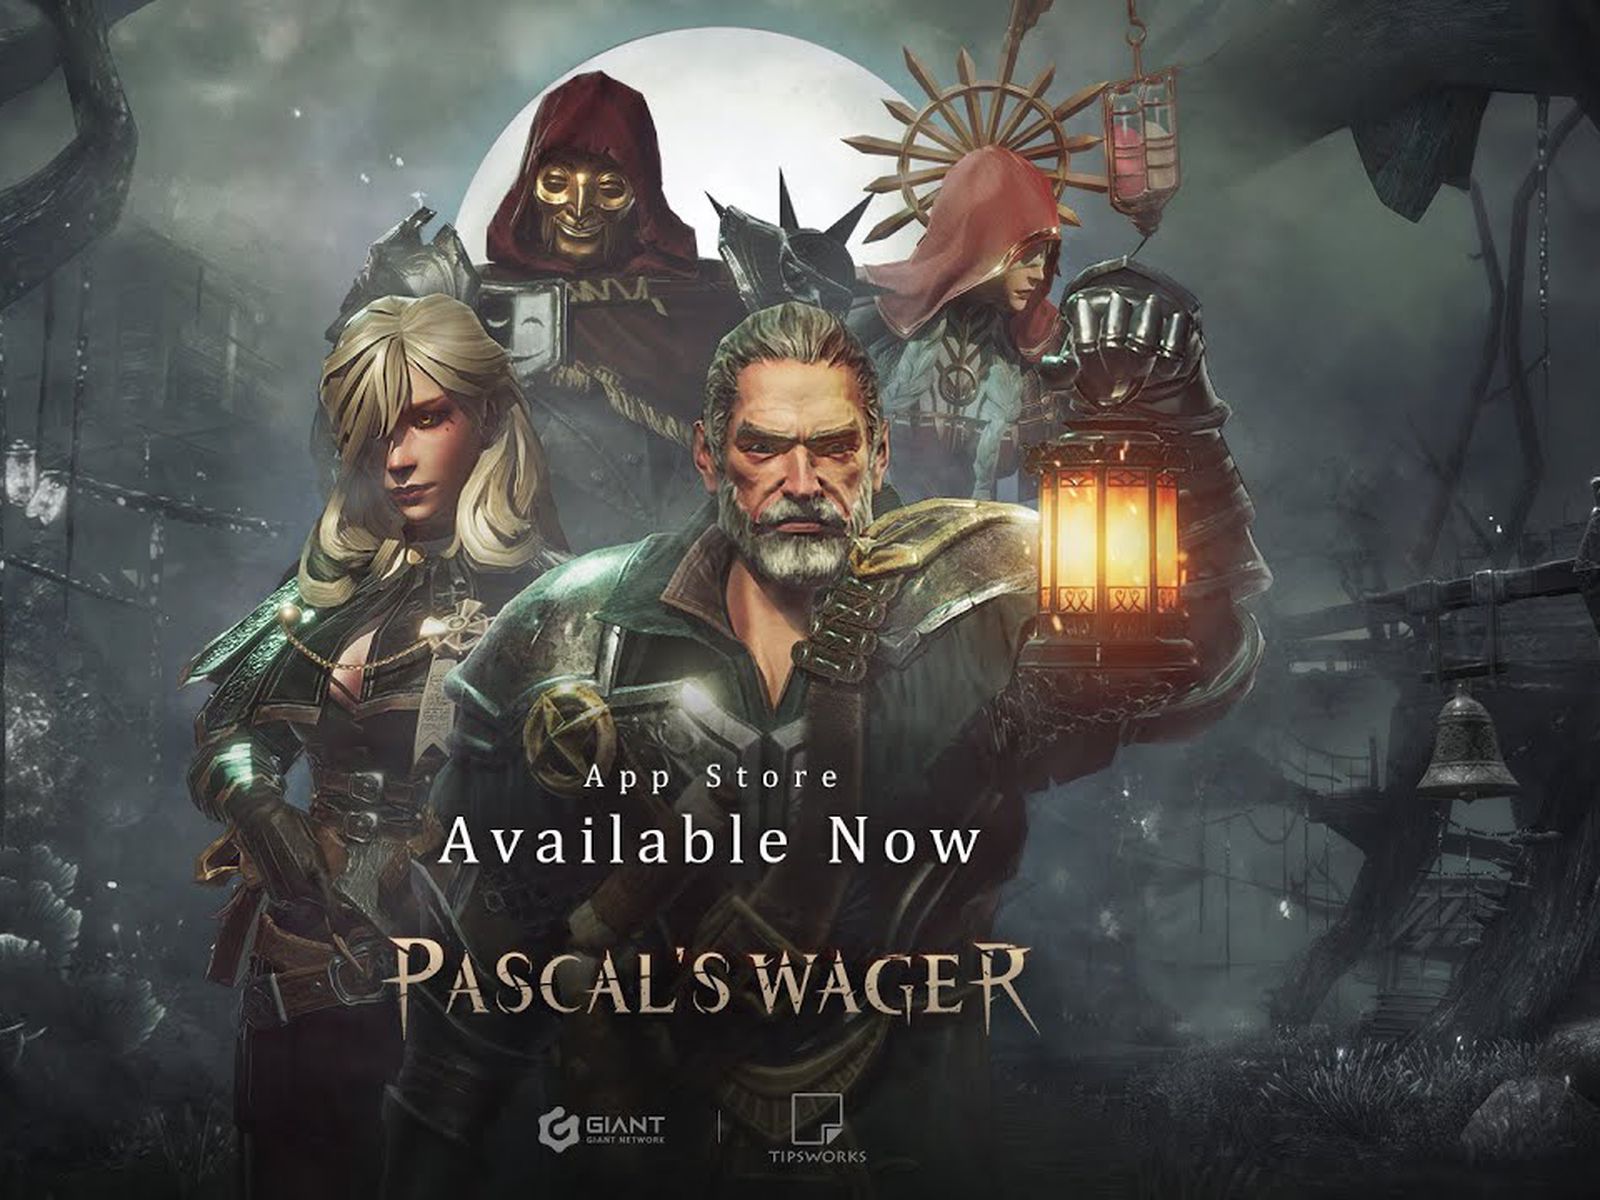 Pascal's Wager. Первый босс Pascal. Первый Вестник Pascal's Wager. Pascal Wagers game. Андроид игра pascals wager